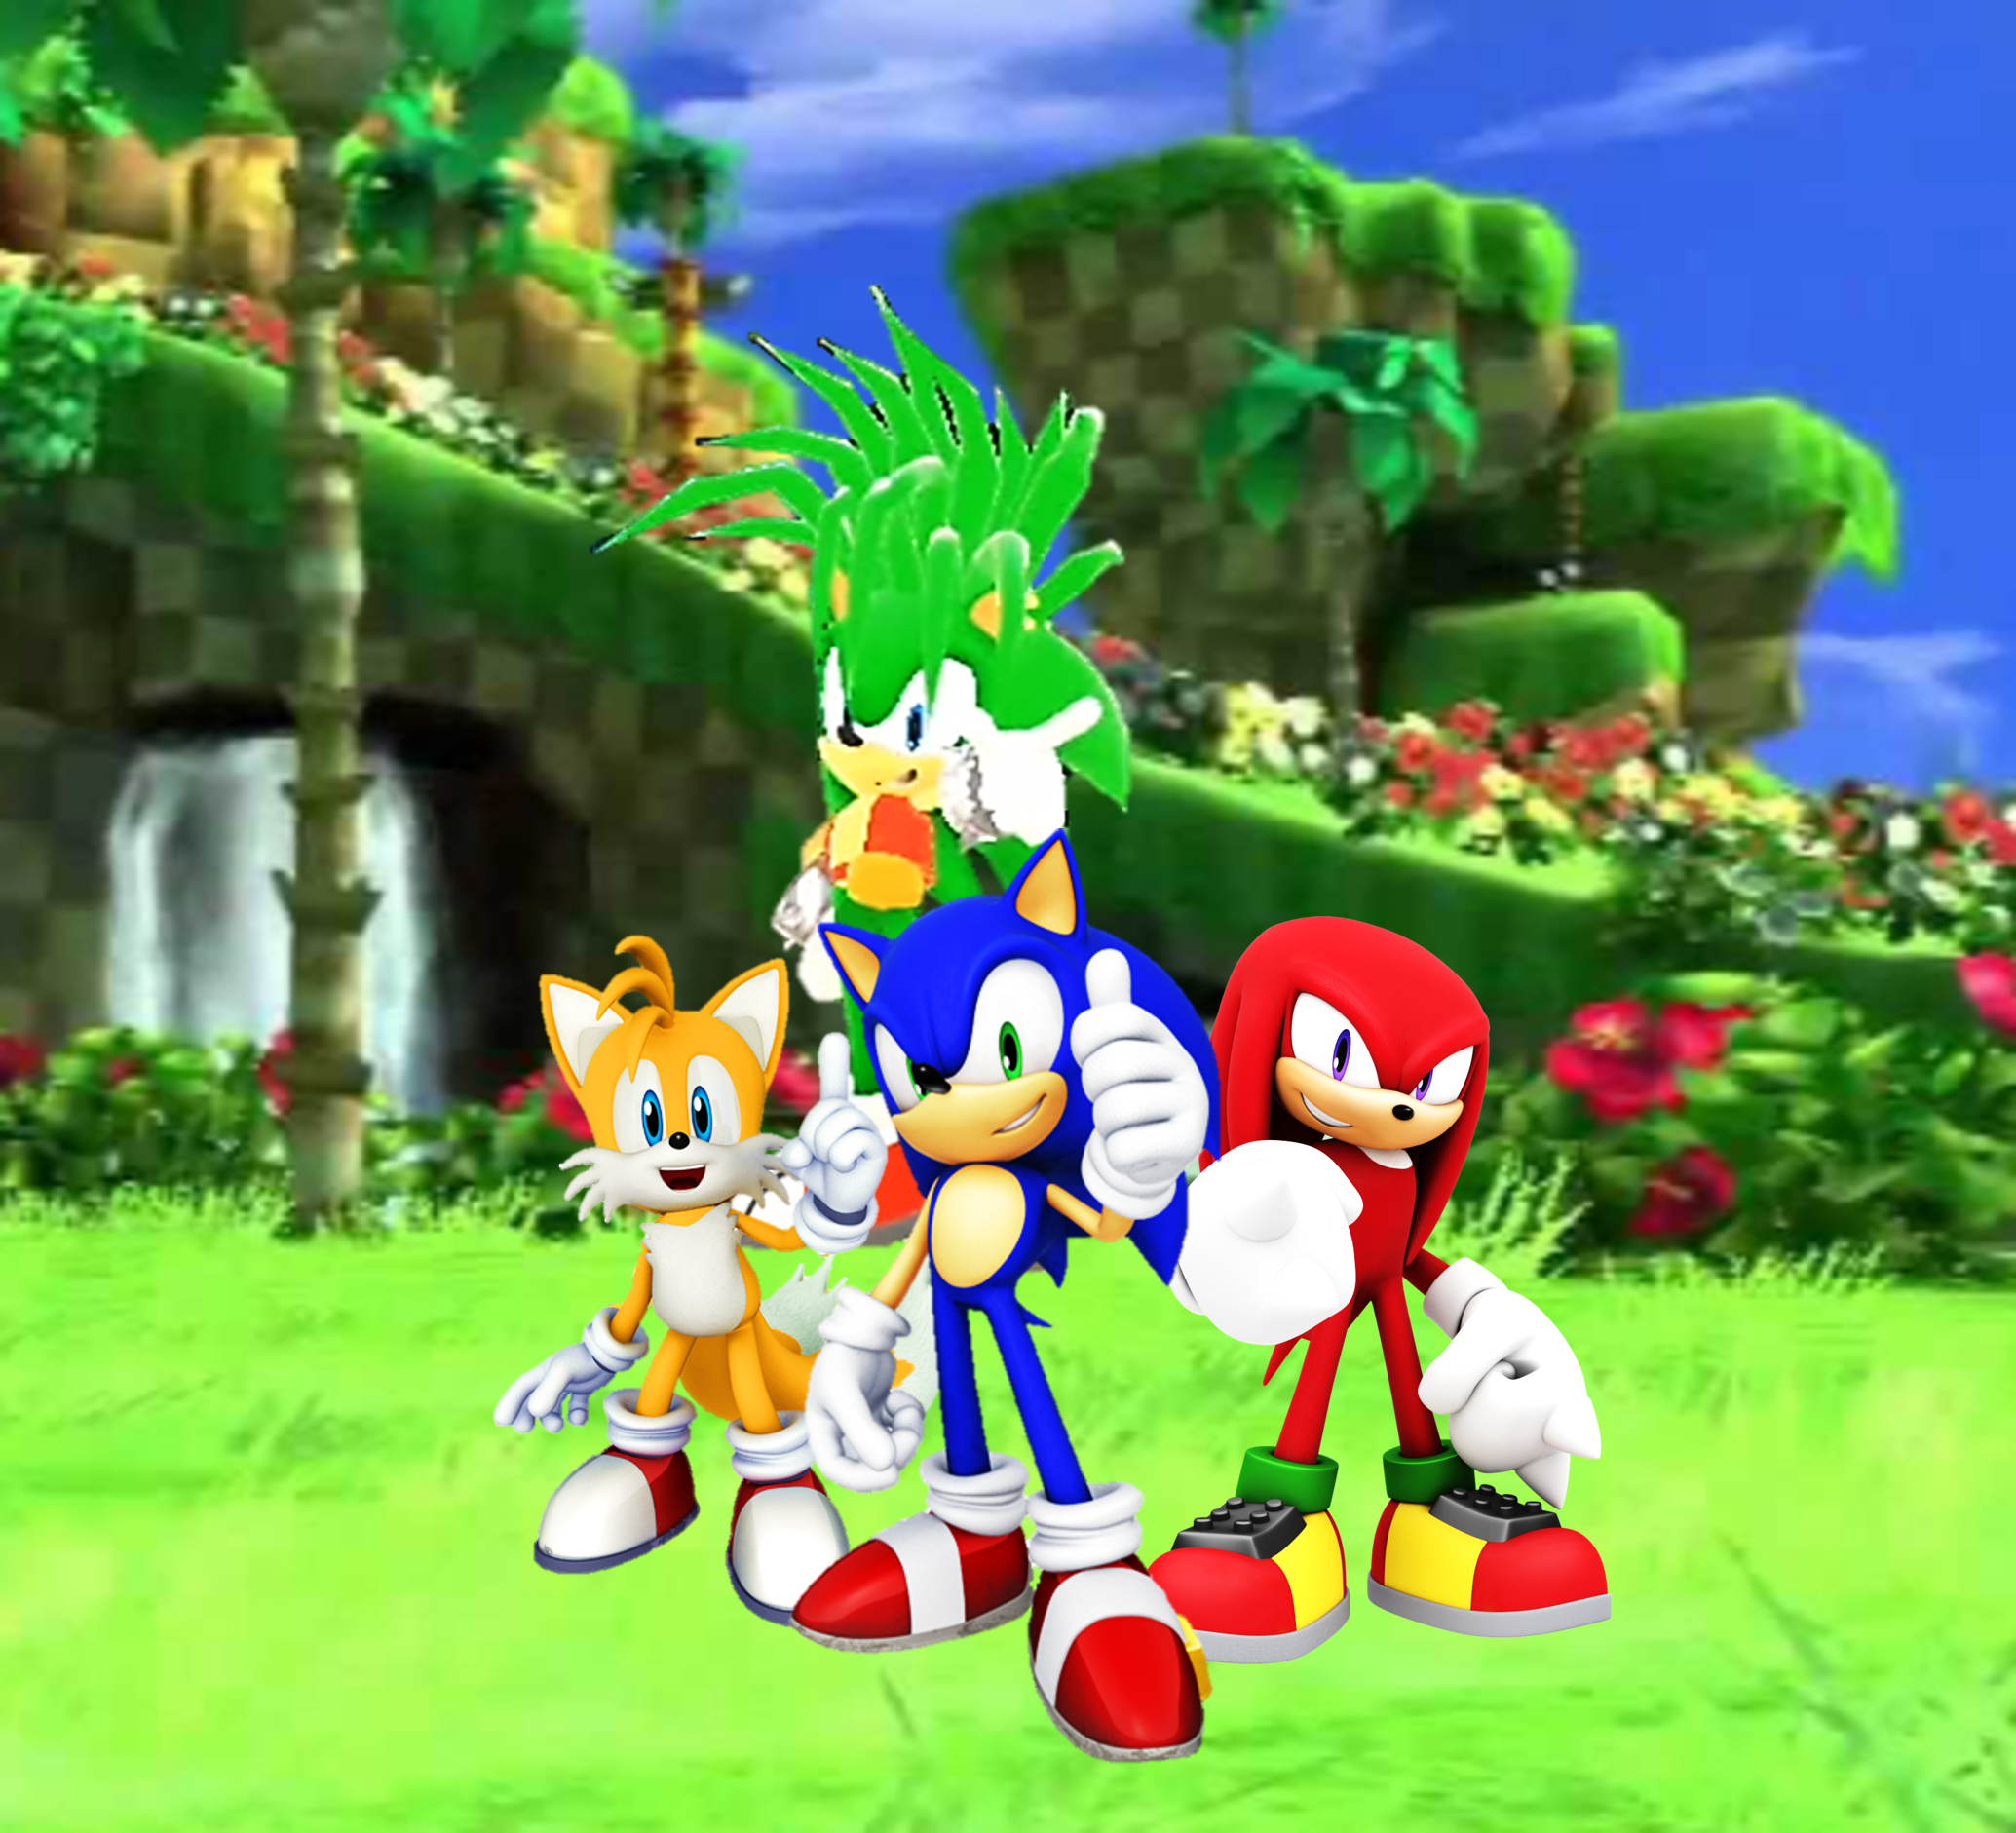 Sonic Tails Knuckles And His Brother Manic Green Холм, - Background Sonic Green Hill , HD Wallpaper & Backgrounds